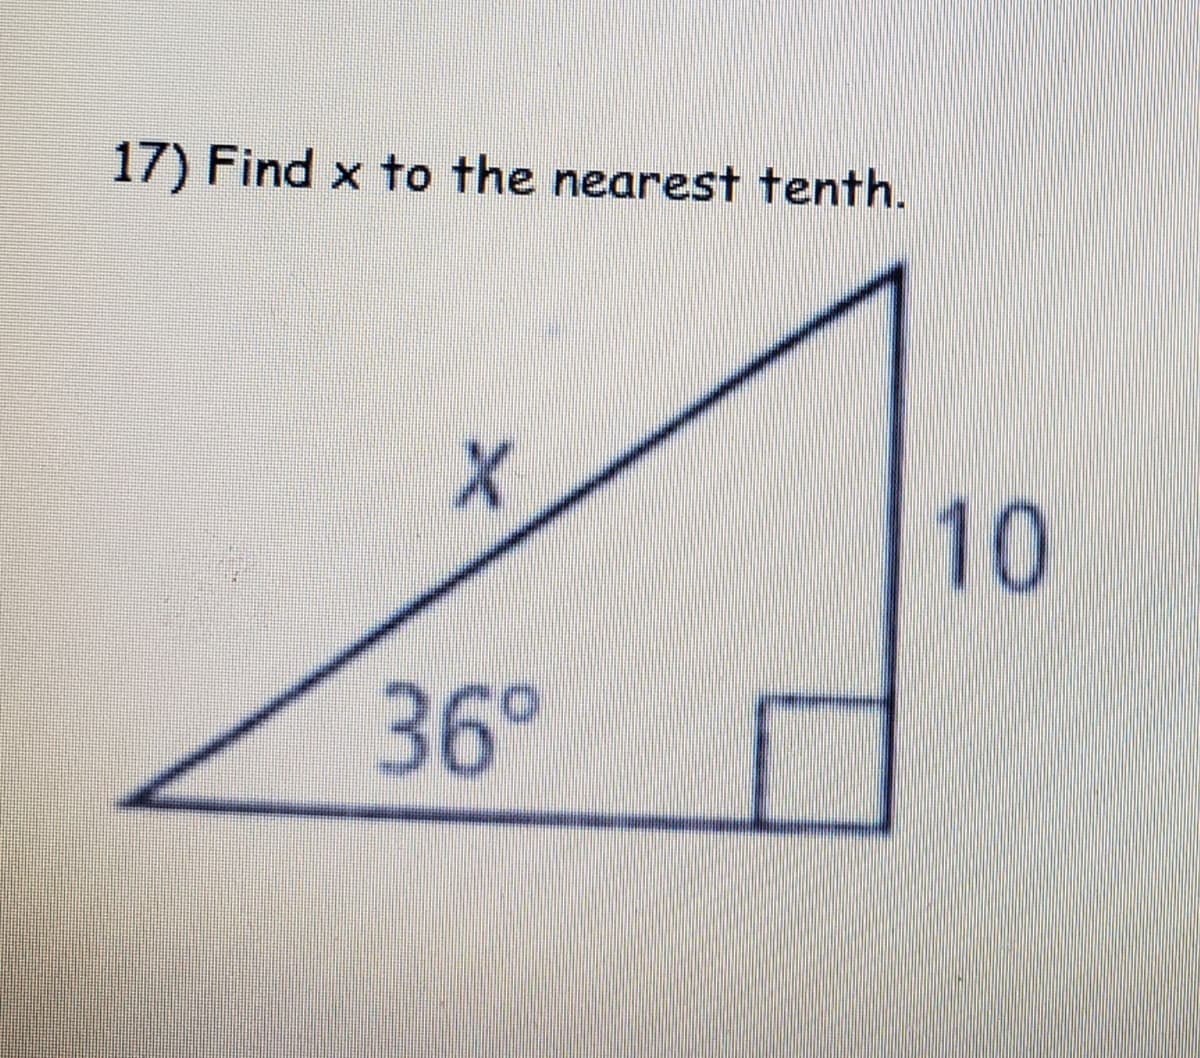 17) Find x to the nearest tenth.
to
36°
10
